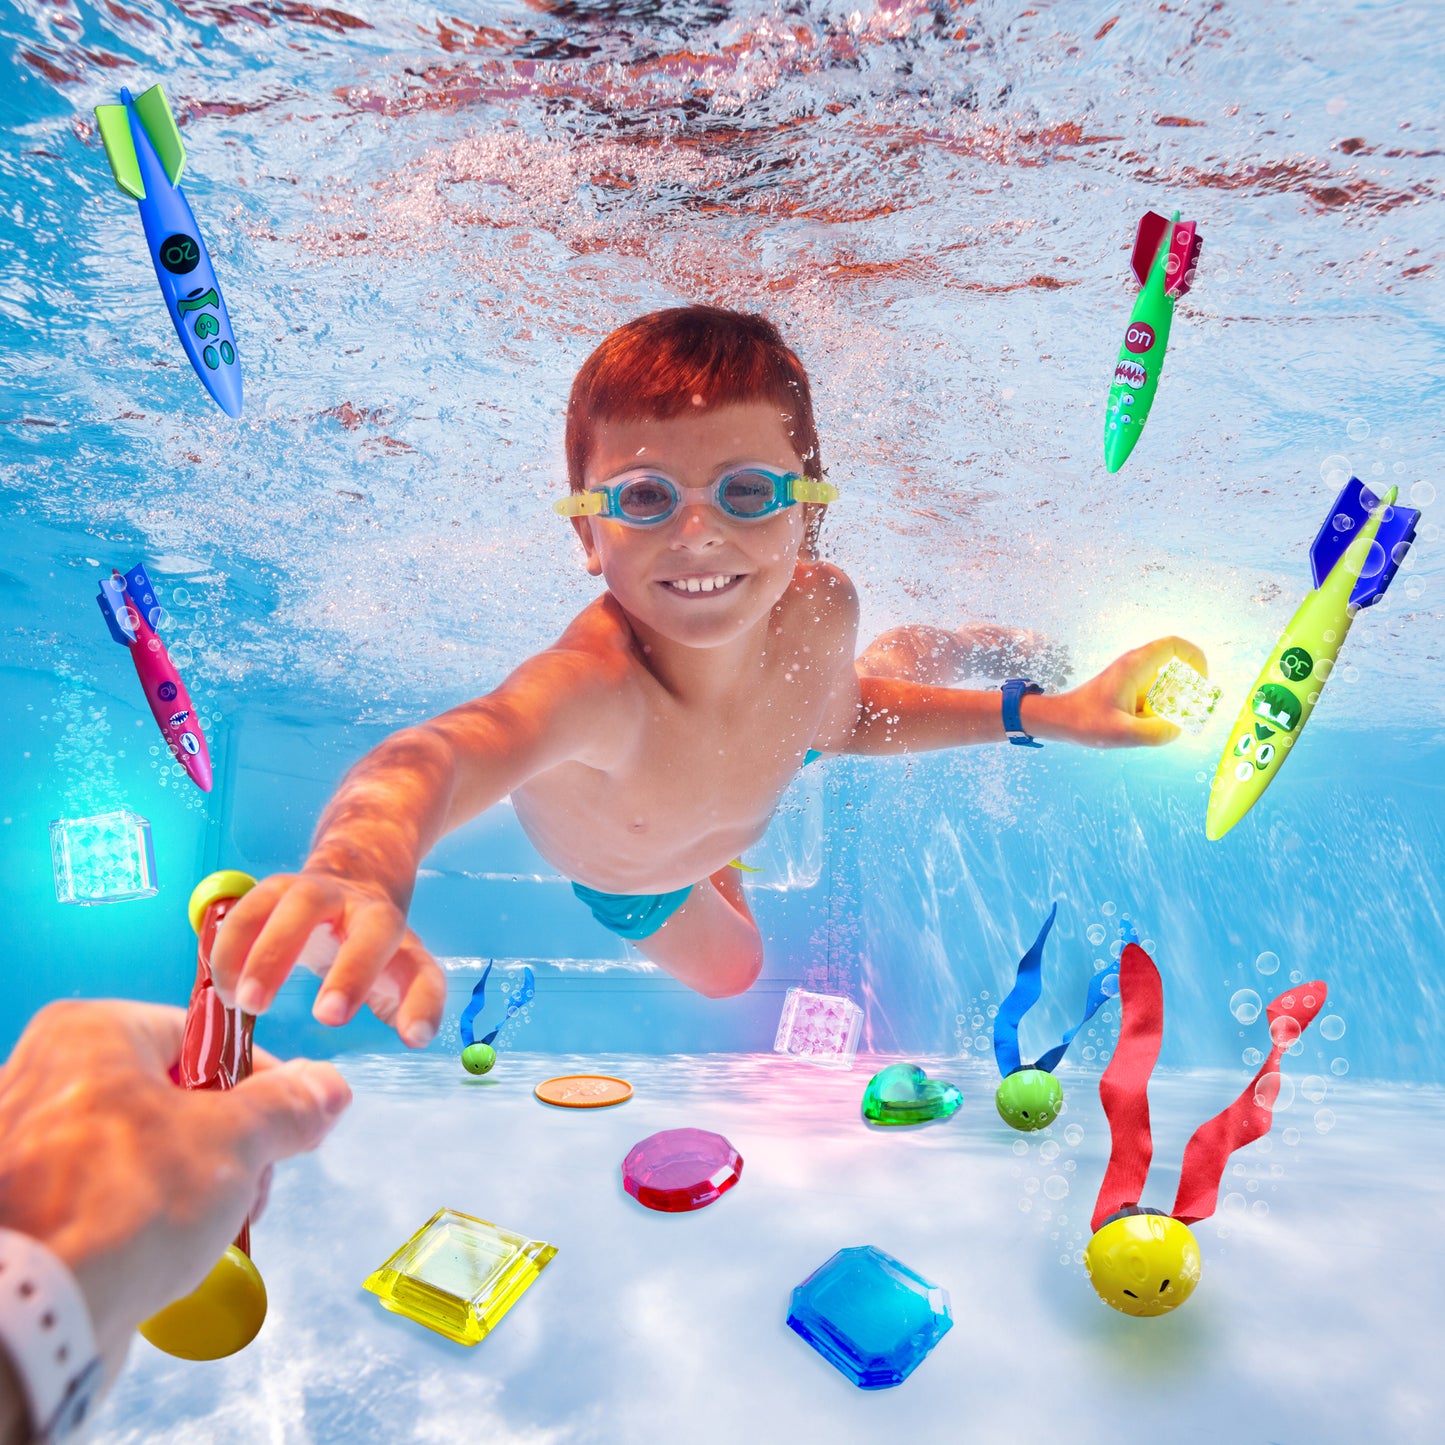 35 Pcs Pool Toys Set with LED Pool Light Cubes Diving and Swimming Learning for Kids